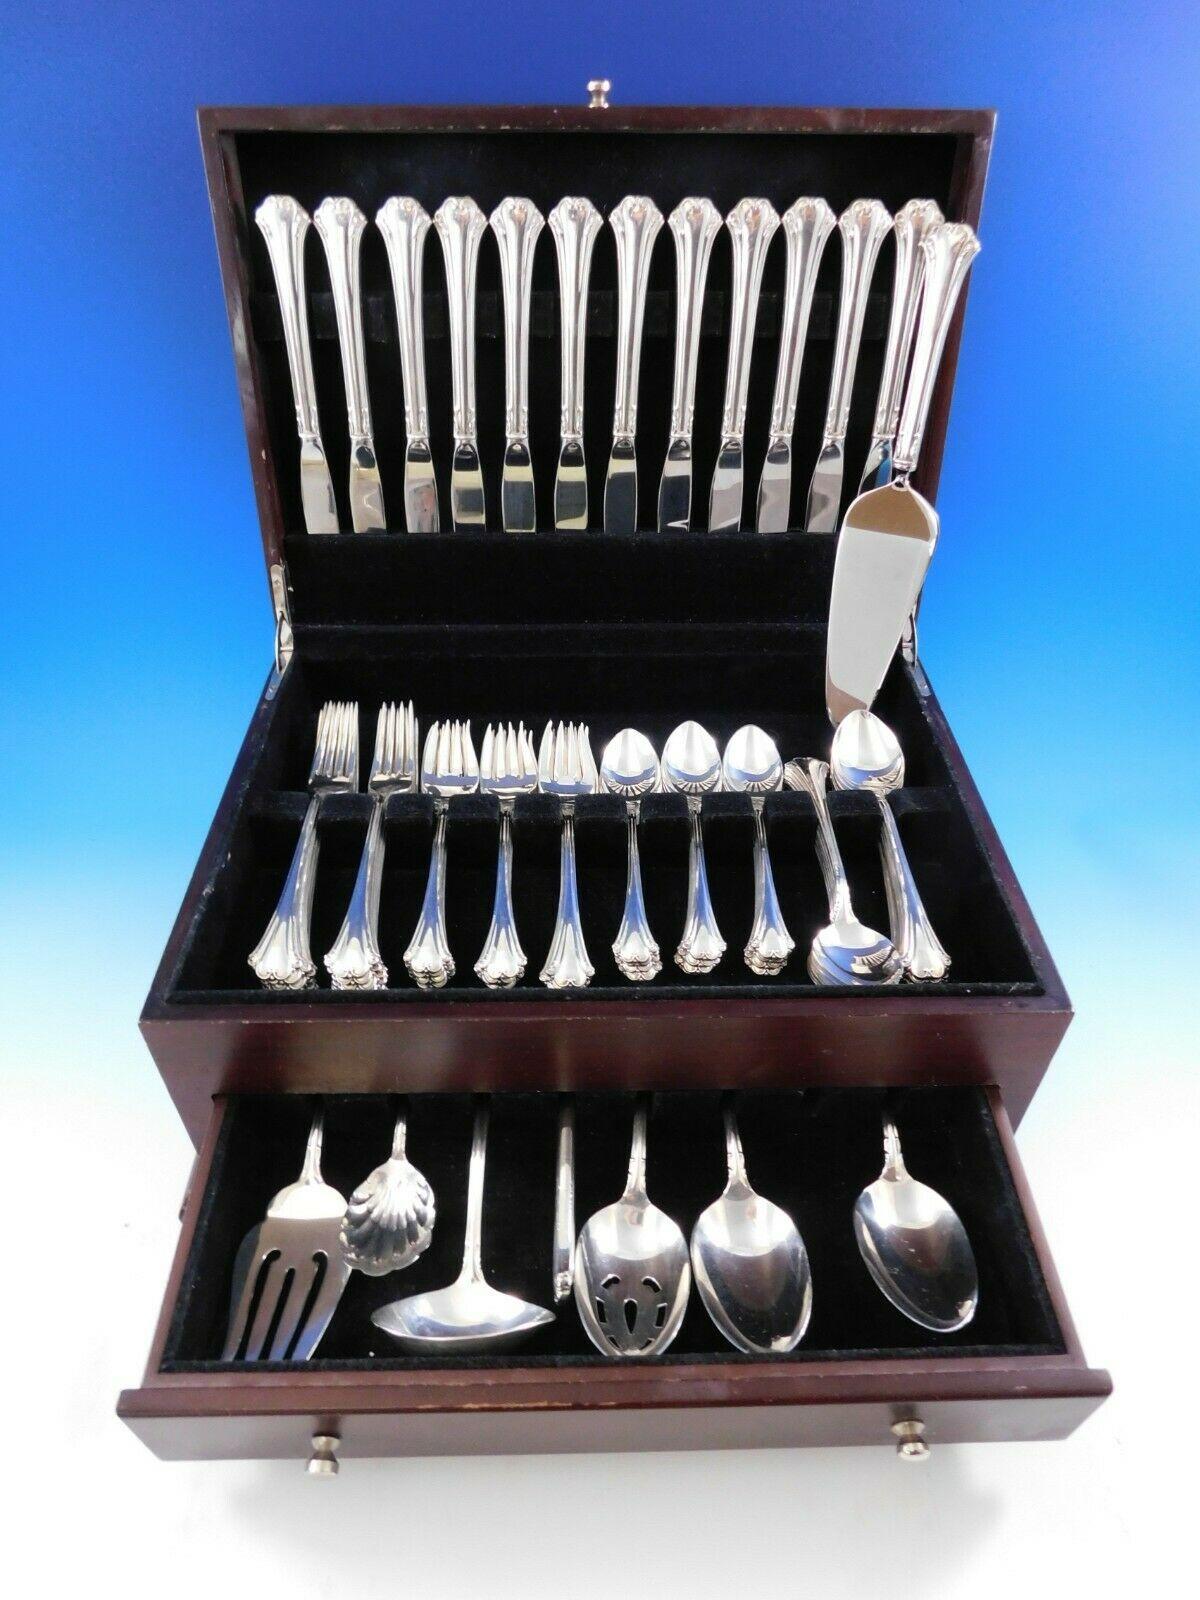 Exquisite English Chippendale by Reed & Barton sterling silver flatware set, 68 pieces. This set includes:

12 knives, 8 7/8